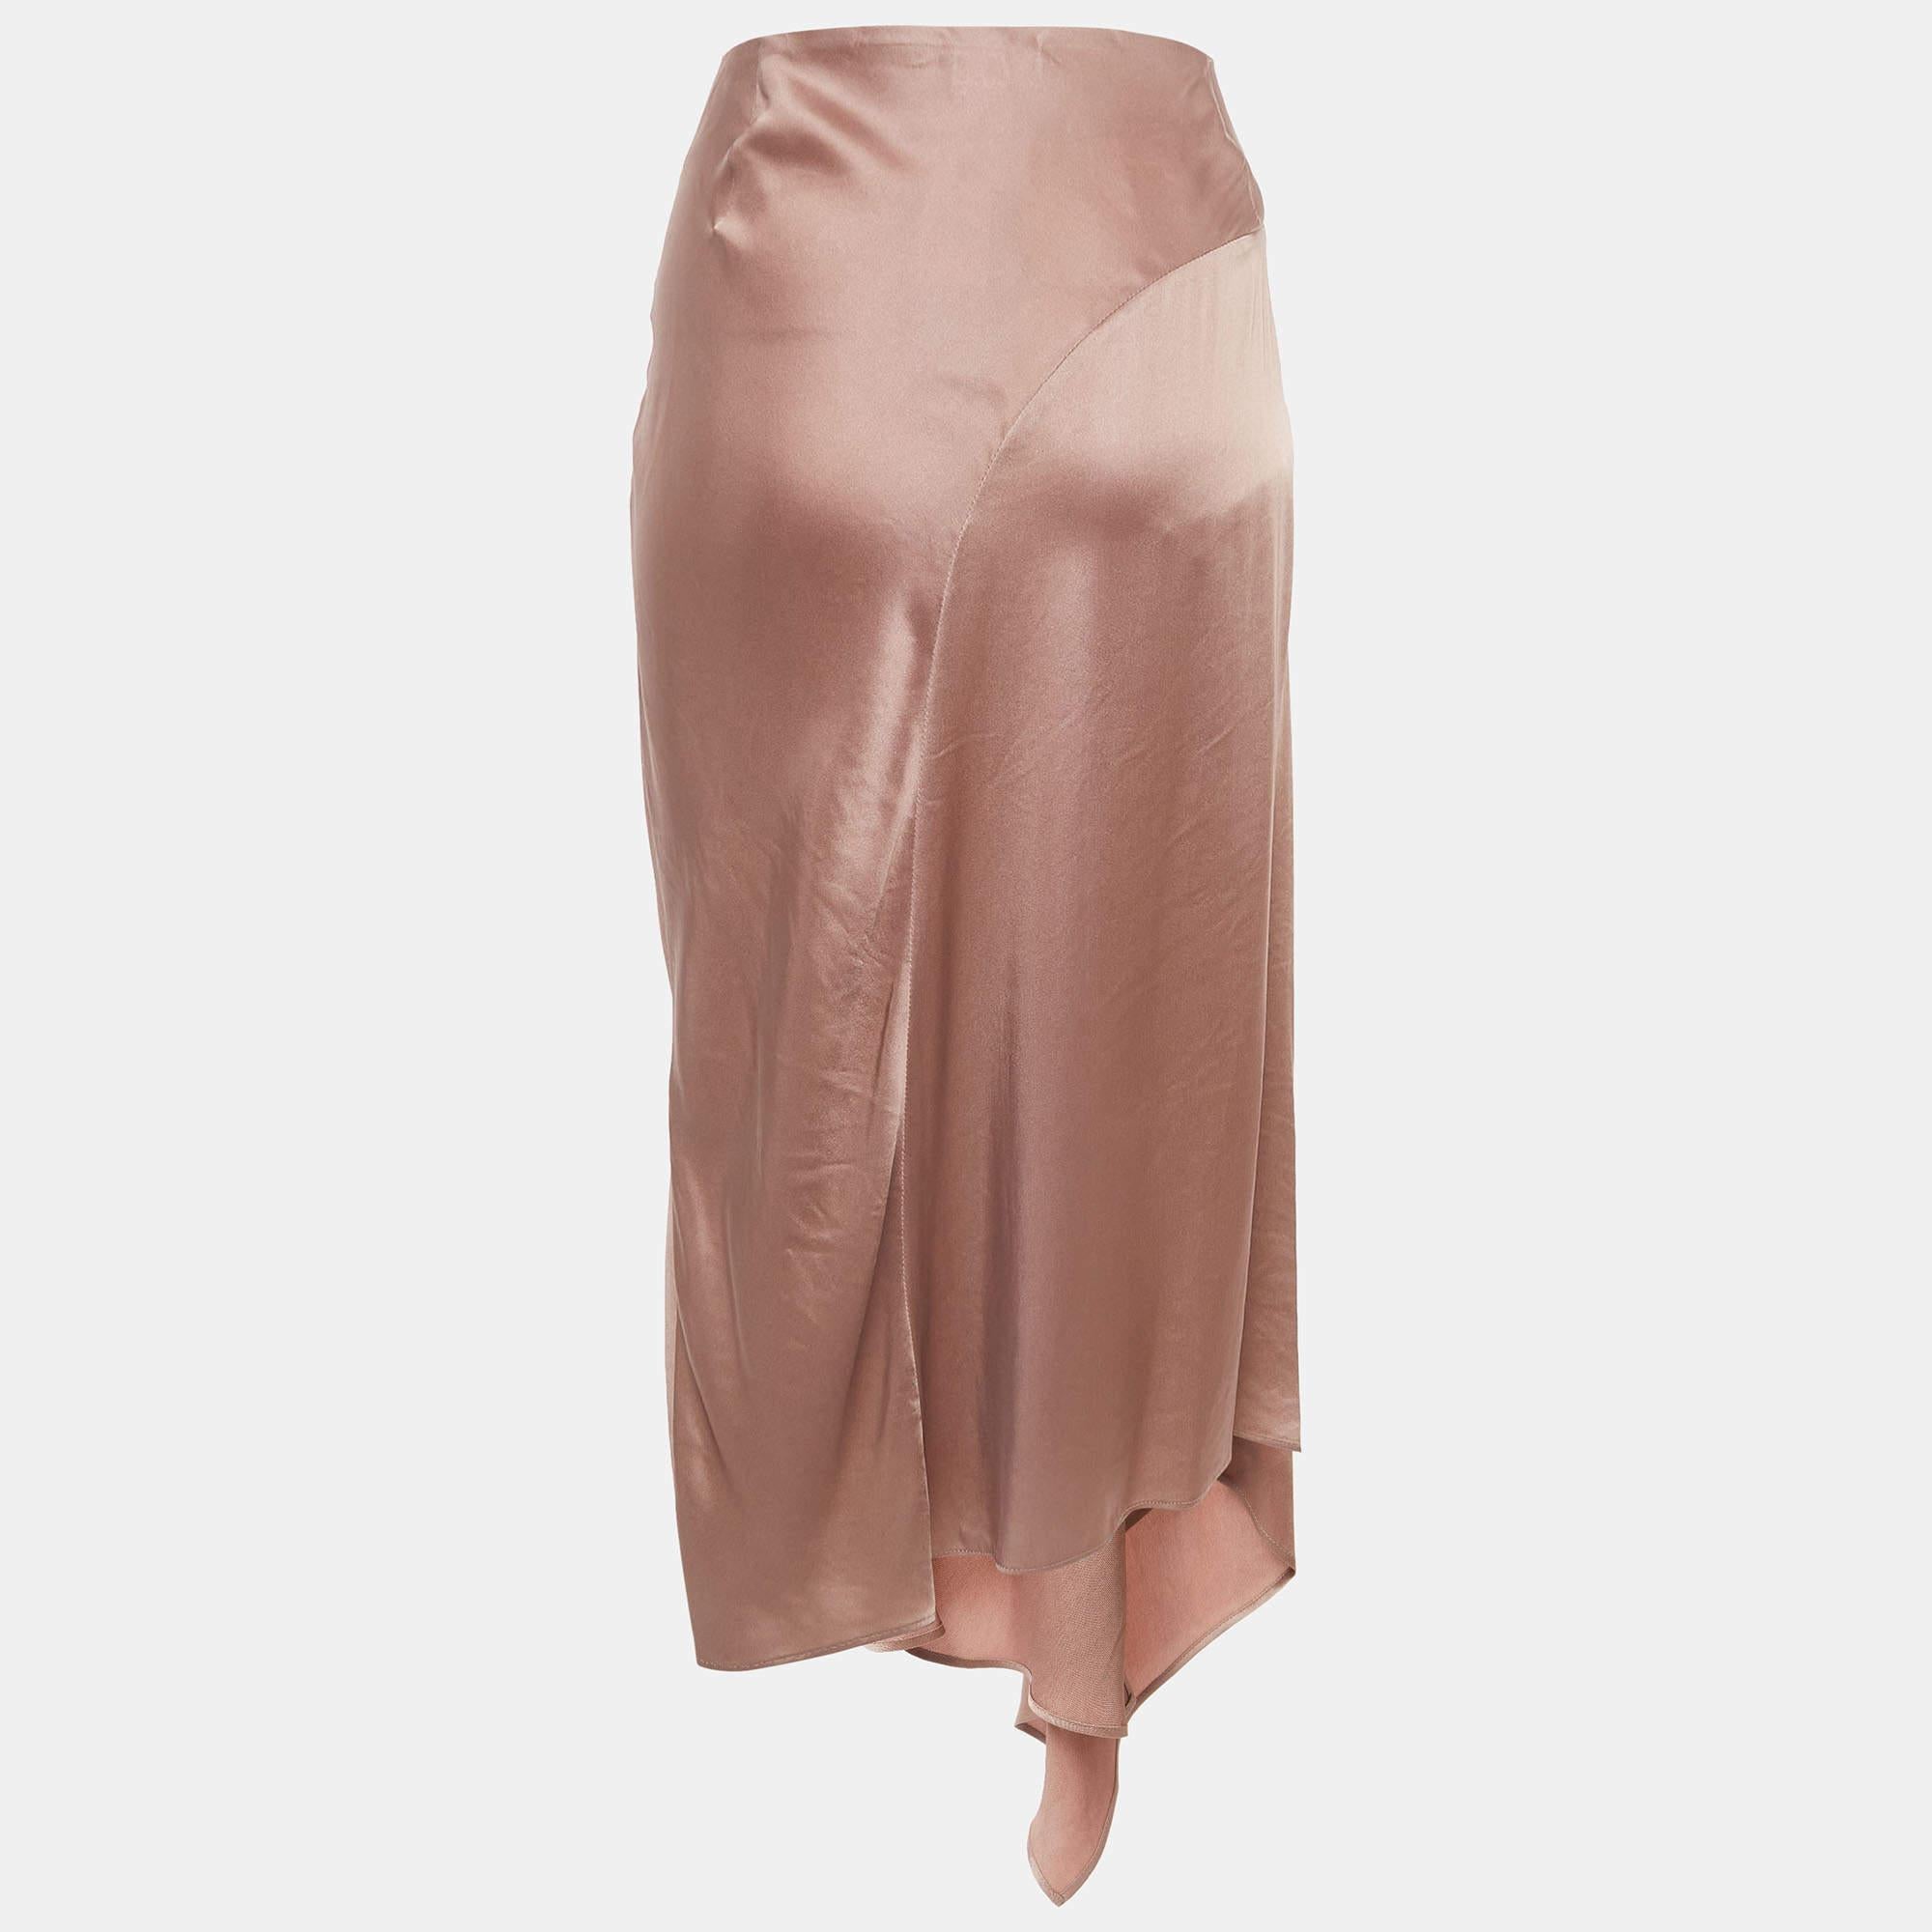 This lovely skirt is beautifully stitched from fine fabric into a flattering silhouette. Pair it with a simple top and strappy heels for a chic look.

